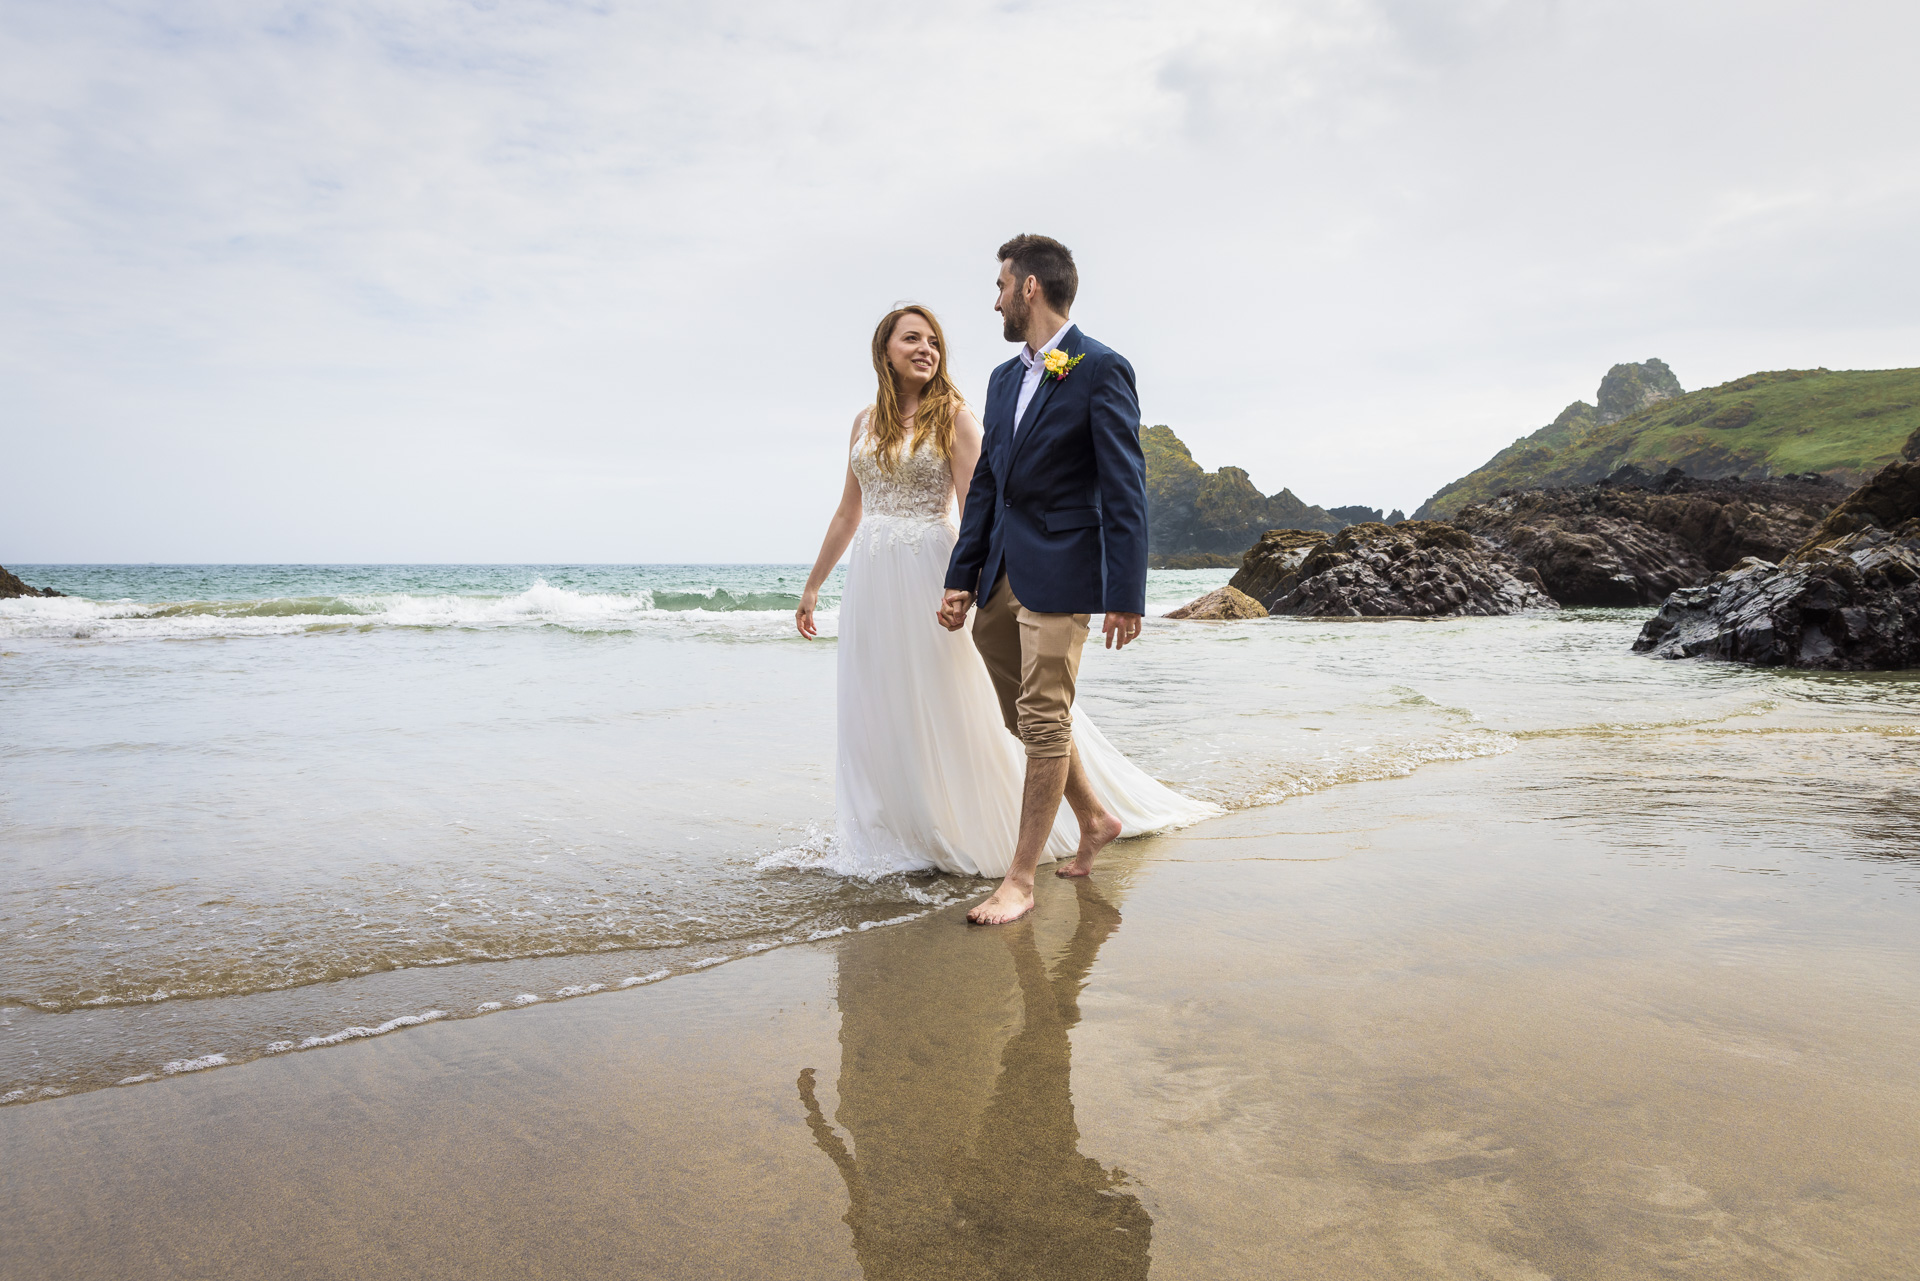 Bride & Groom in the Sea at Kynance Cove on the Lizard in Cornwall following their elopement Wedding at Gunwalloe